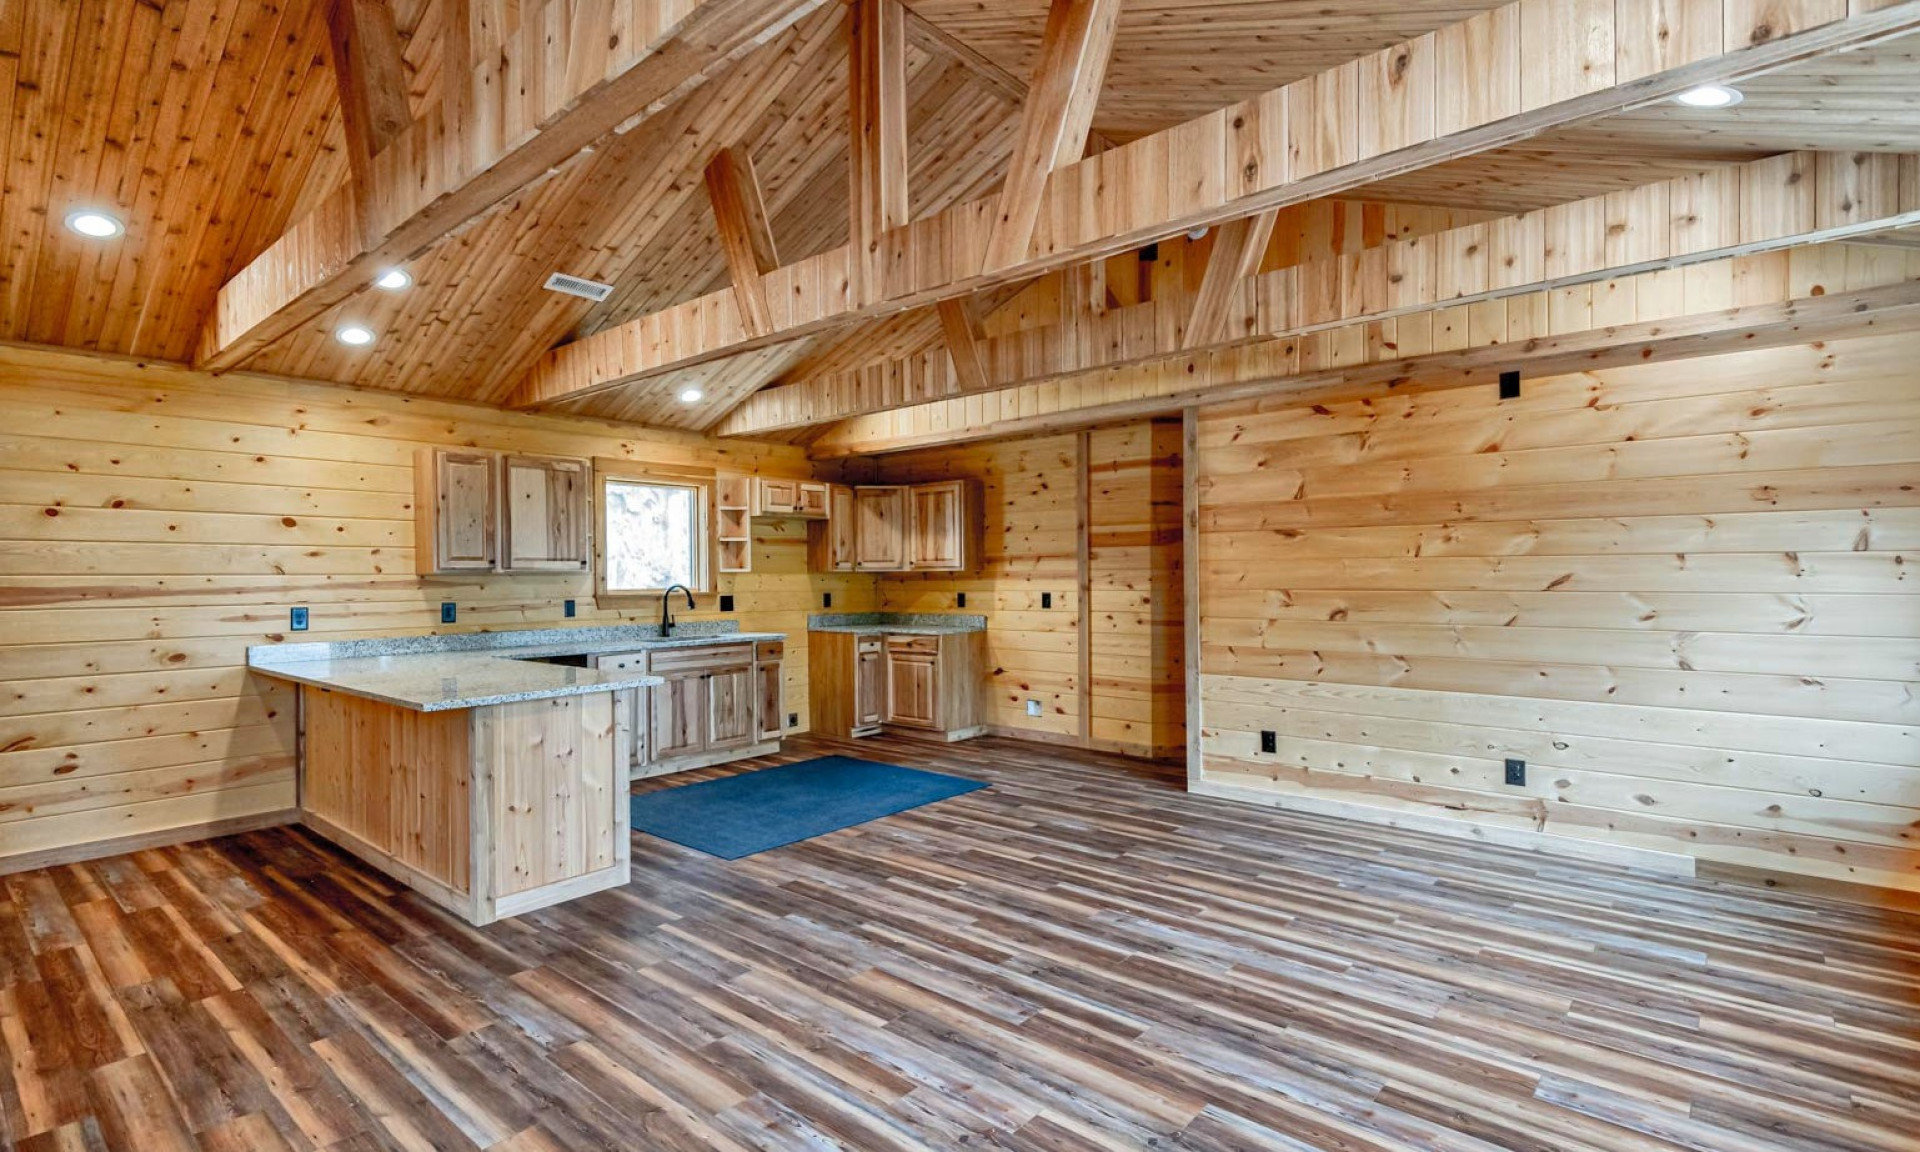 Enjoy privacy and incredible layered long range mountain views from this new mountain cabin located just off of Homestead Drive in the Wilkes area of the North Carolina Mountains.